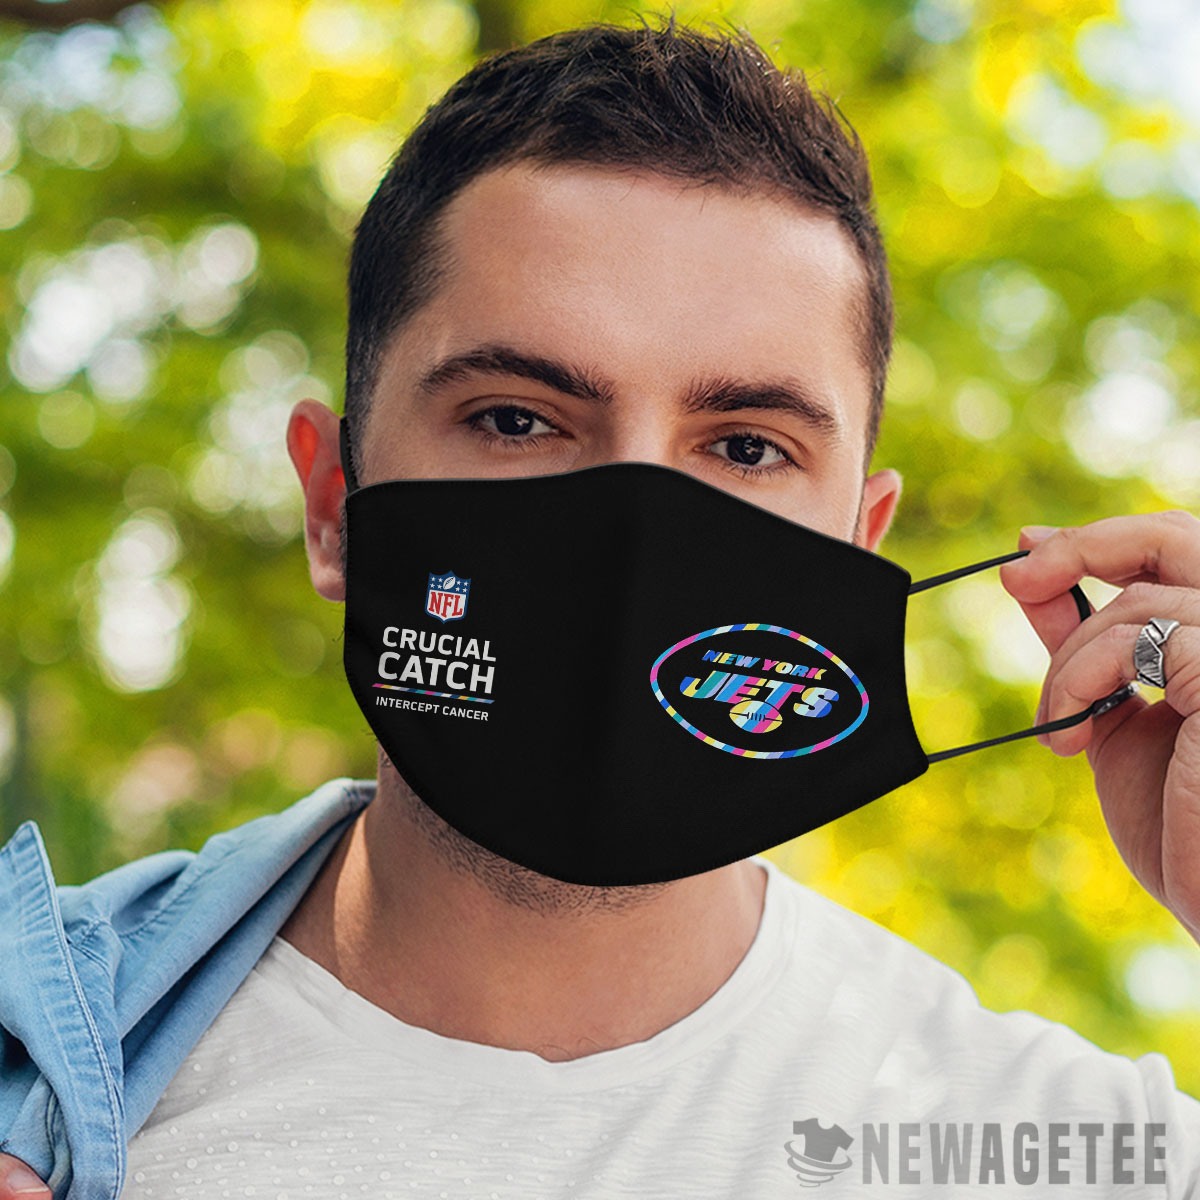 New York Jets Nfl Crucial Catch Multicolor Face Mask Cloth Reusable